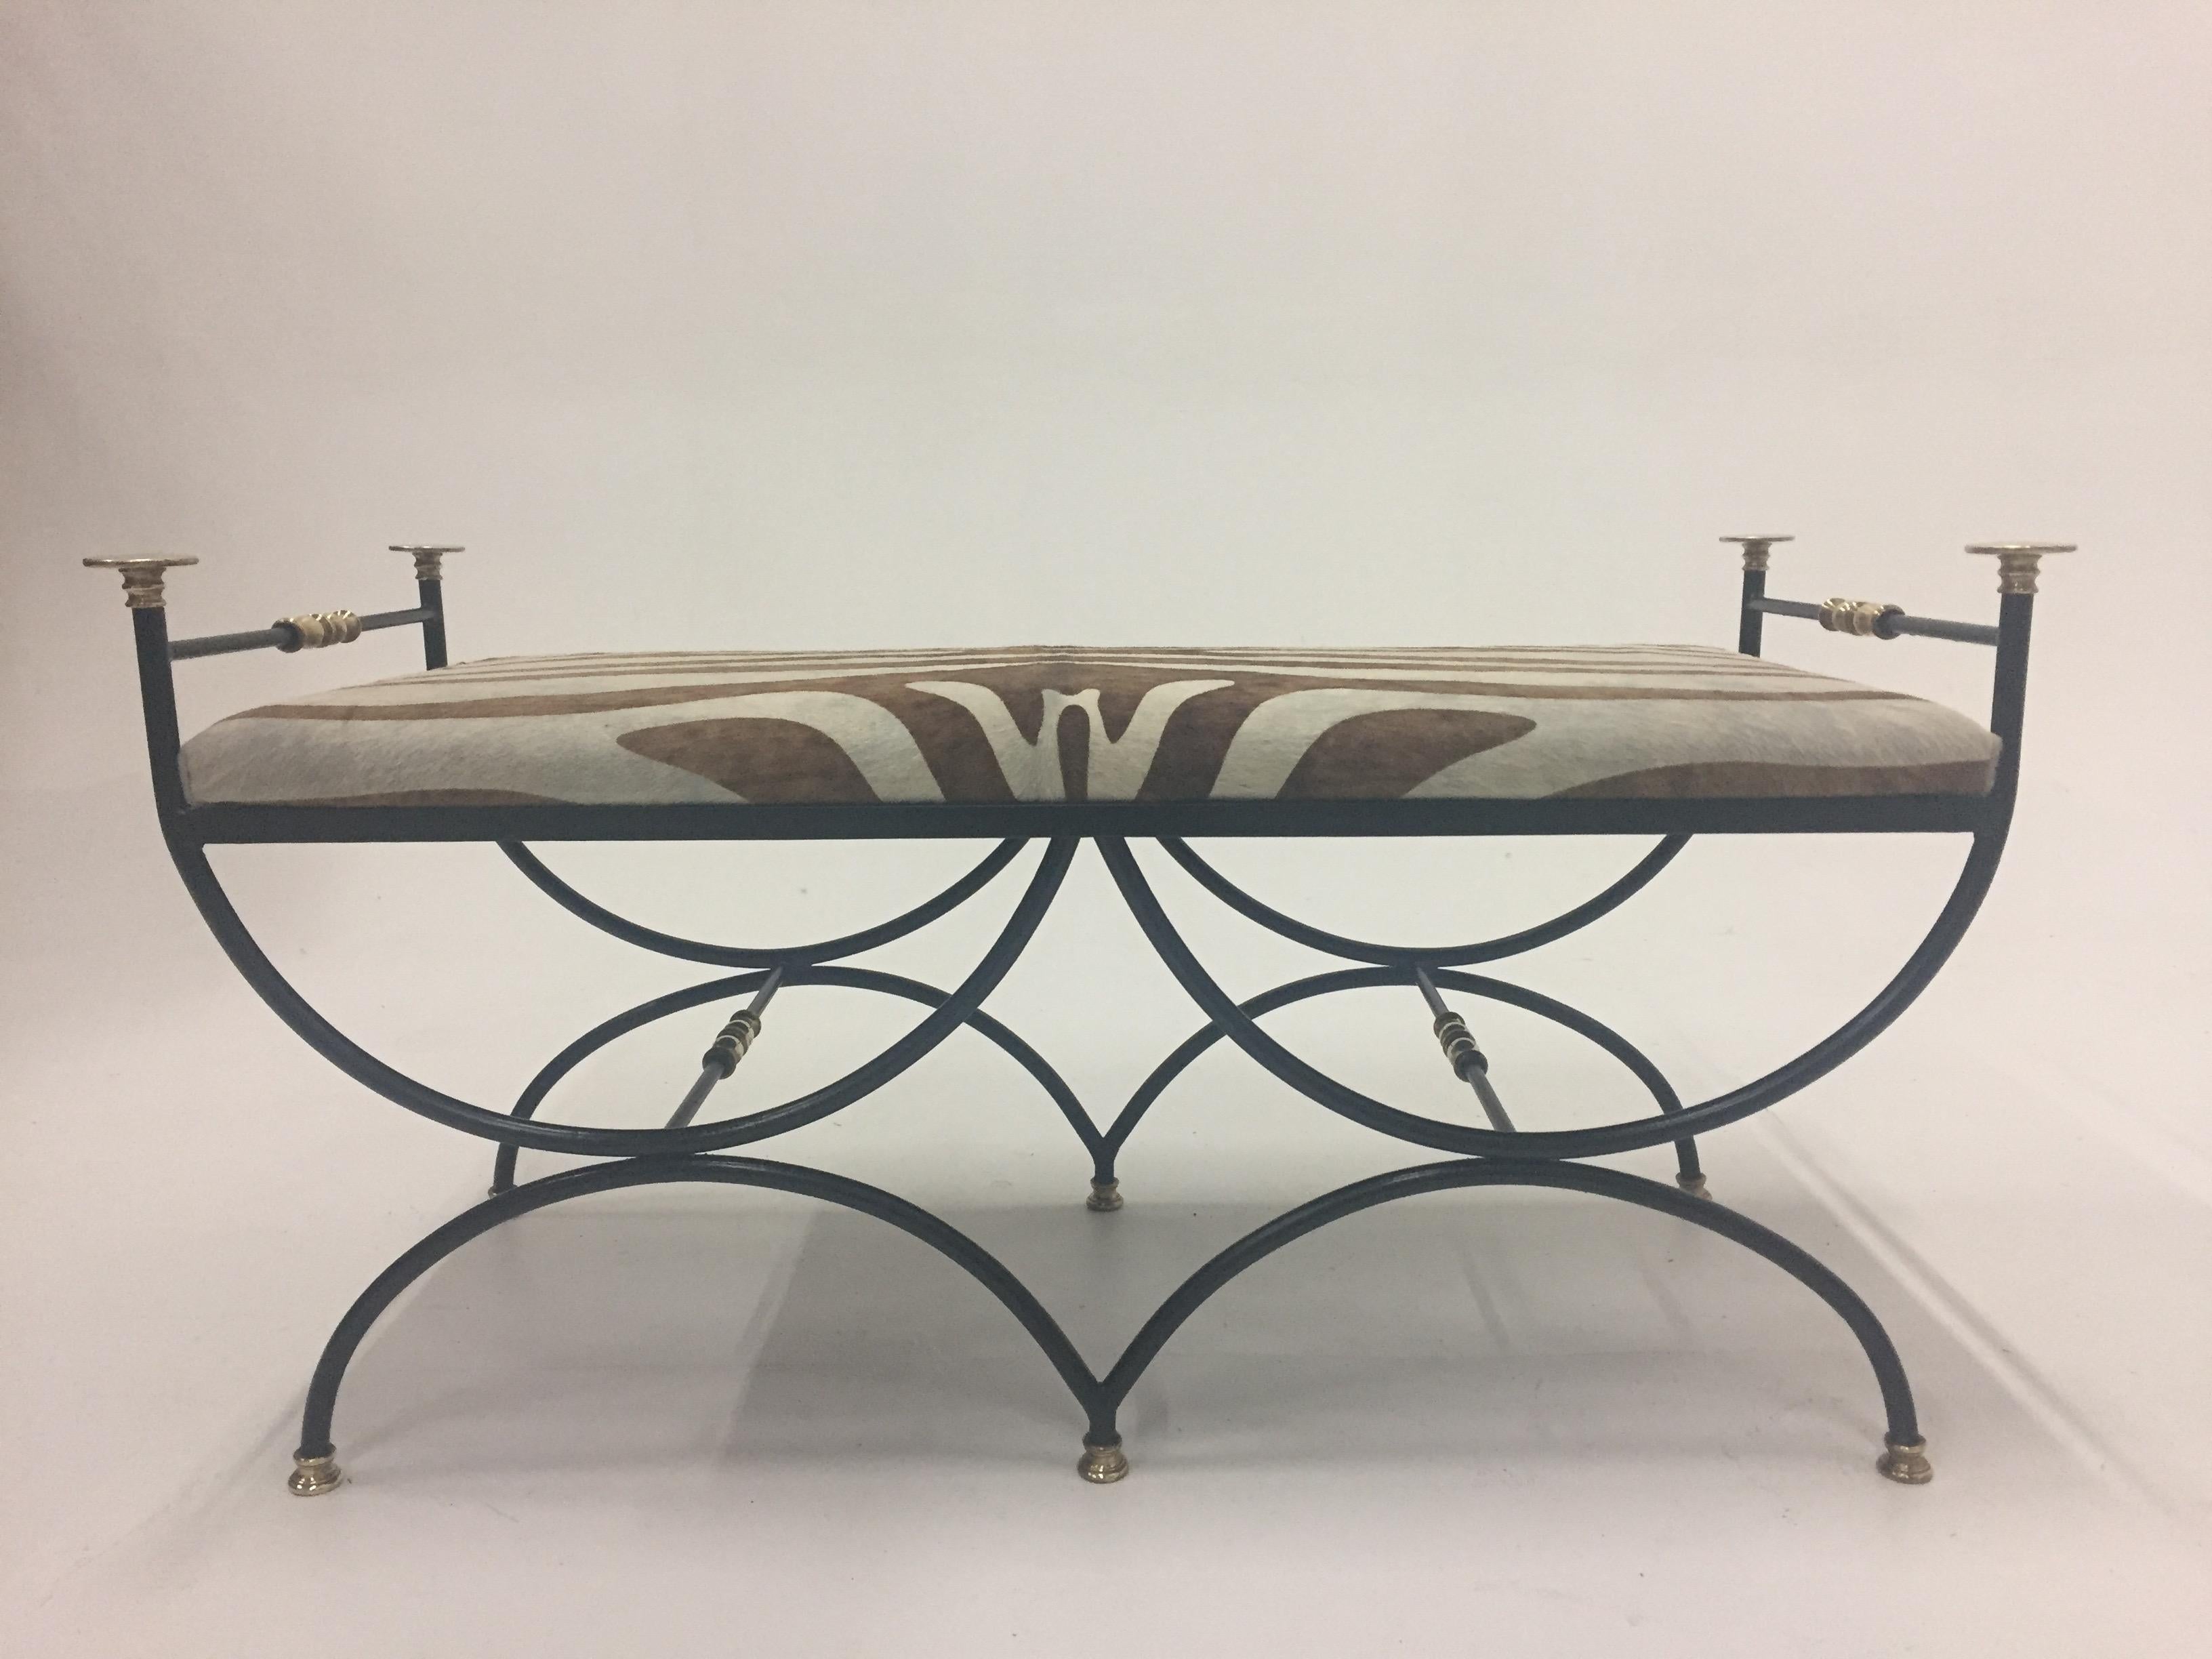 Neoclassical Italian Vintage Wrought Iron Brass and Cowhide Bench